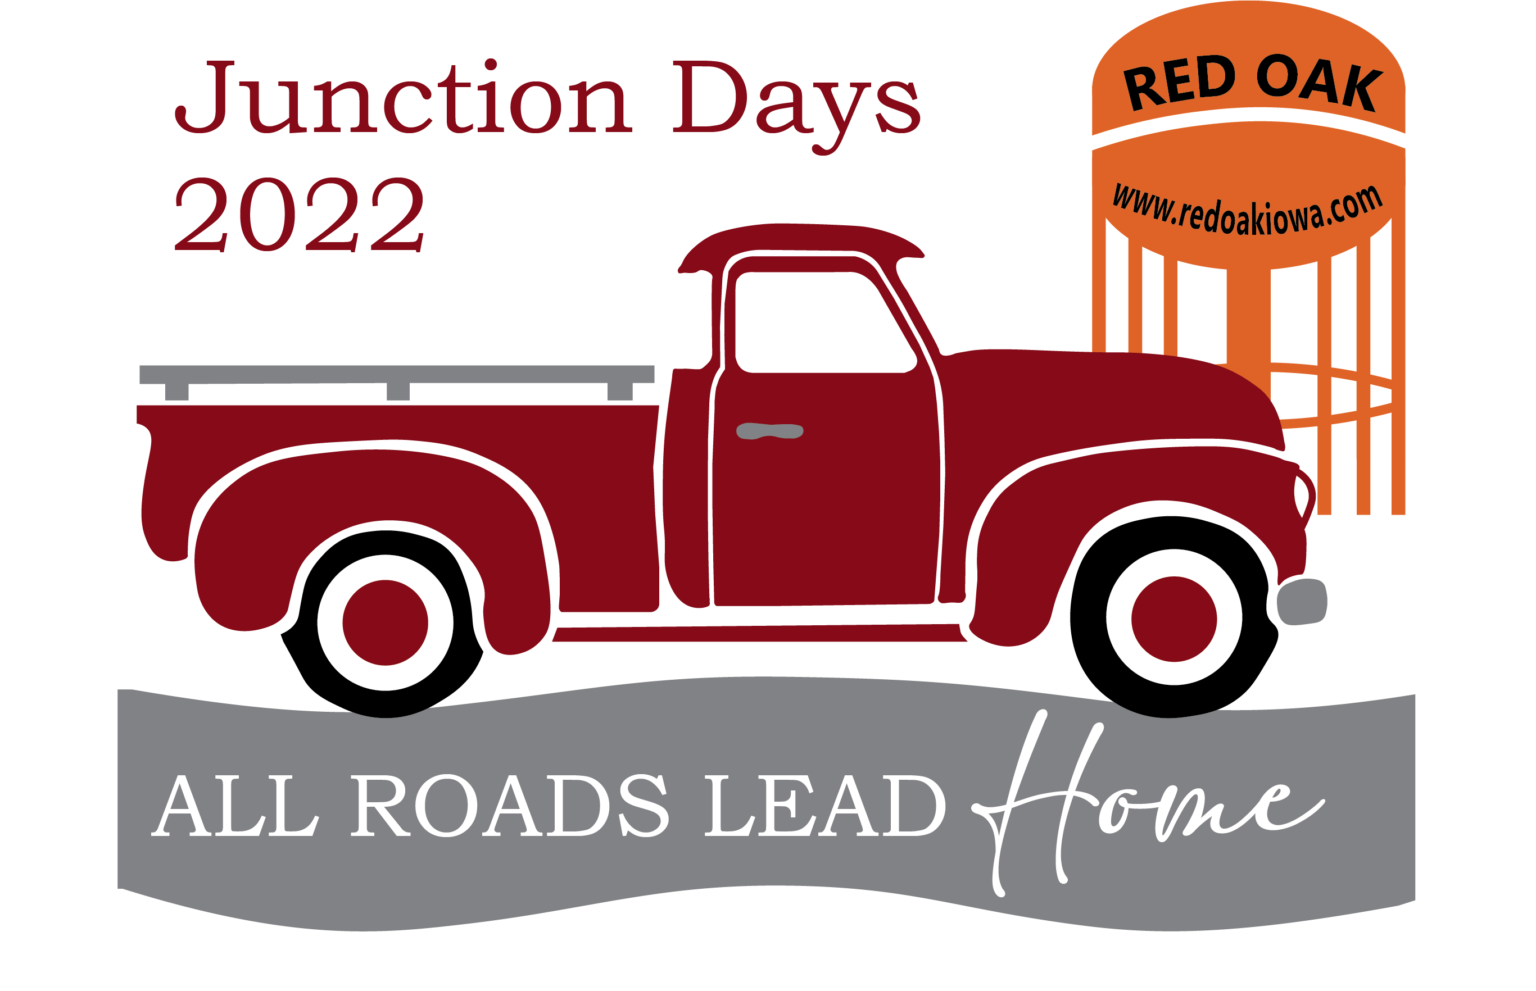 Event Promo Photo For Junction Days 2022